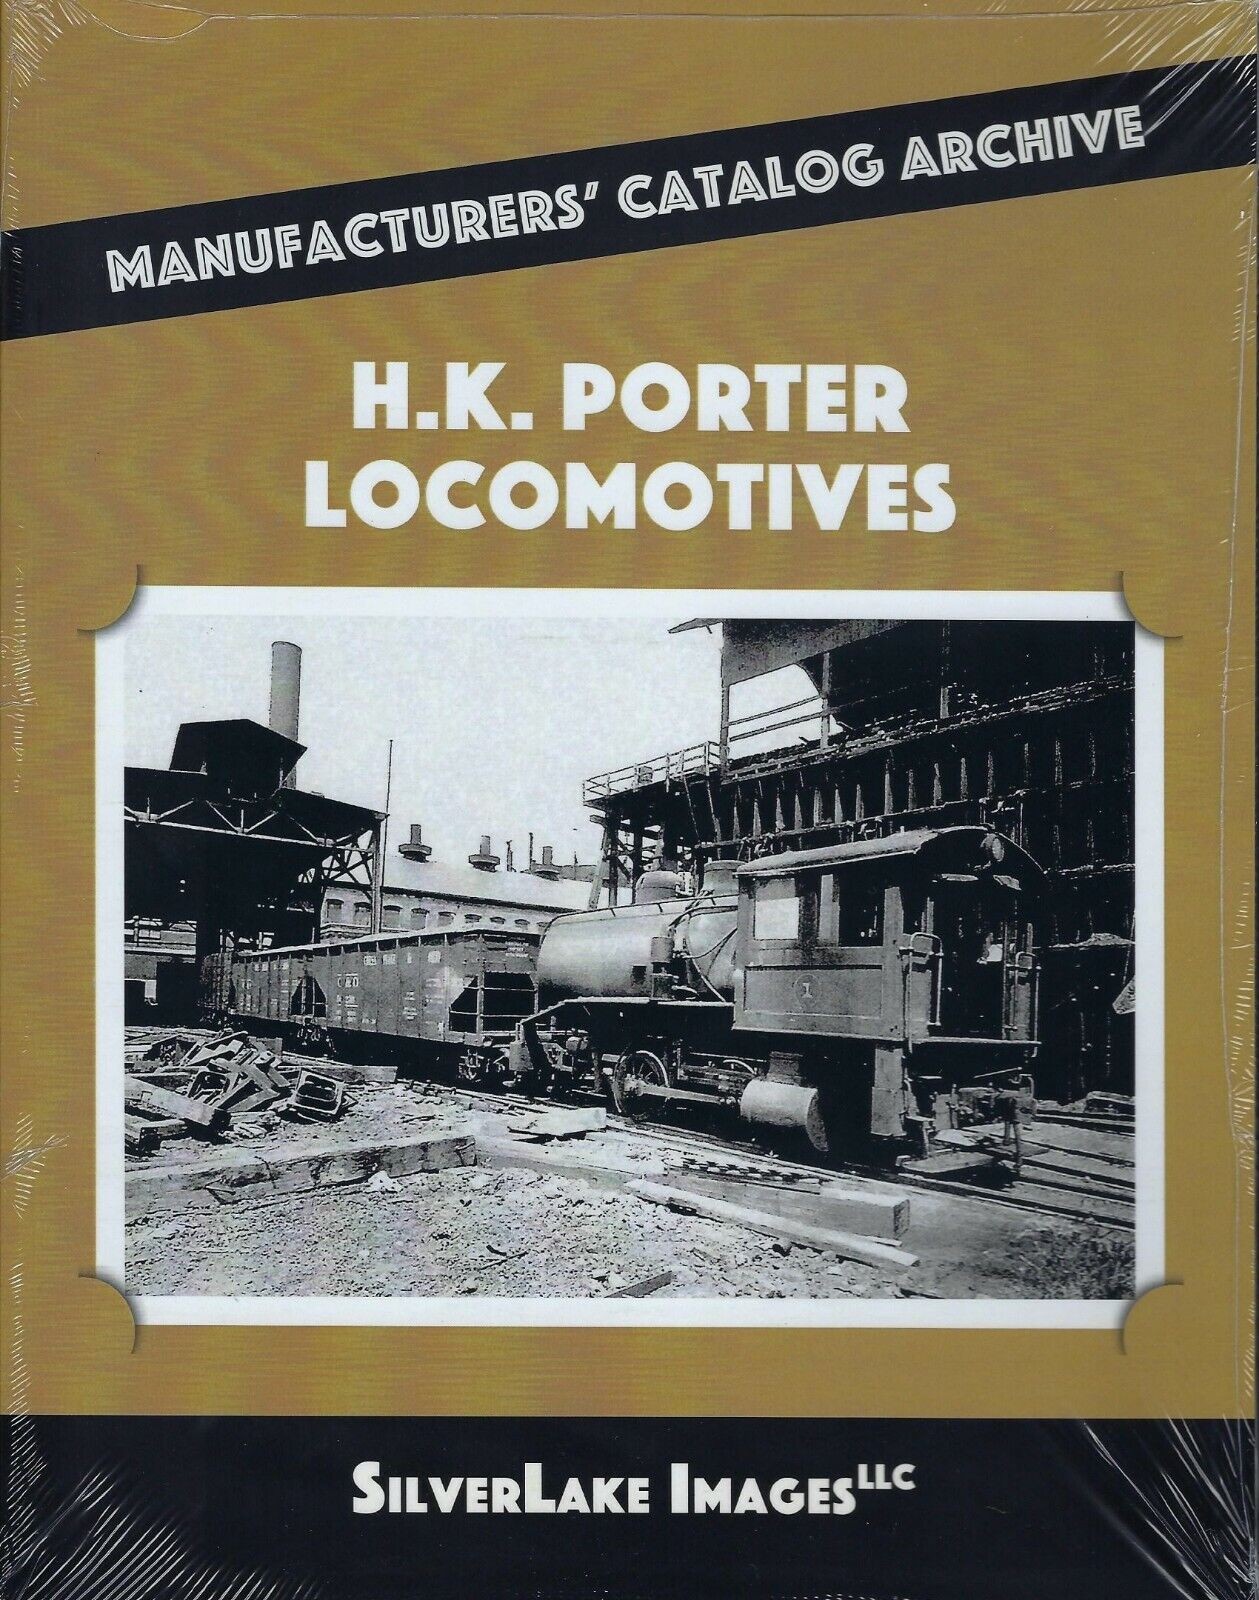 H.K. PORTER LOCOMOTIVES from Manufacturers\' Catalog, Out of Print BRAND NEW BOOK